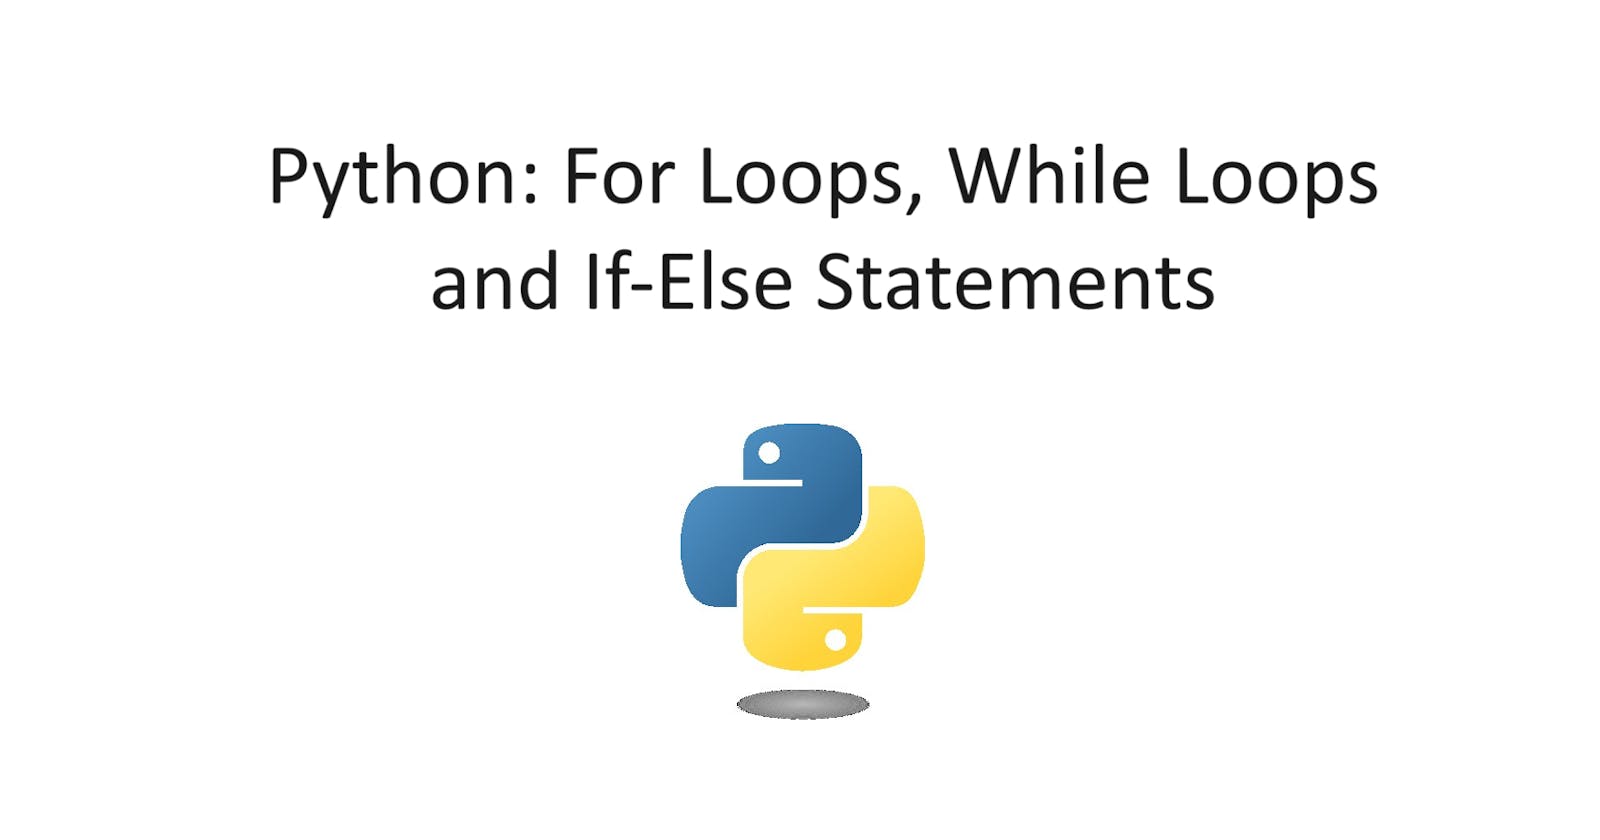 Python: For Loops, While Loops and If-Else Statements